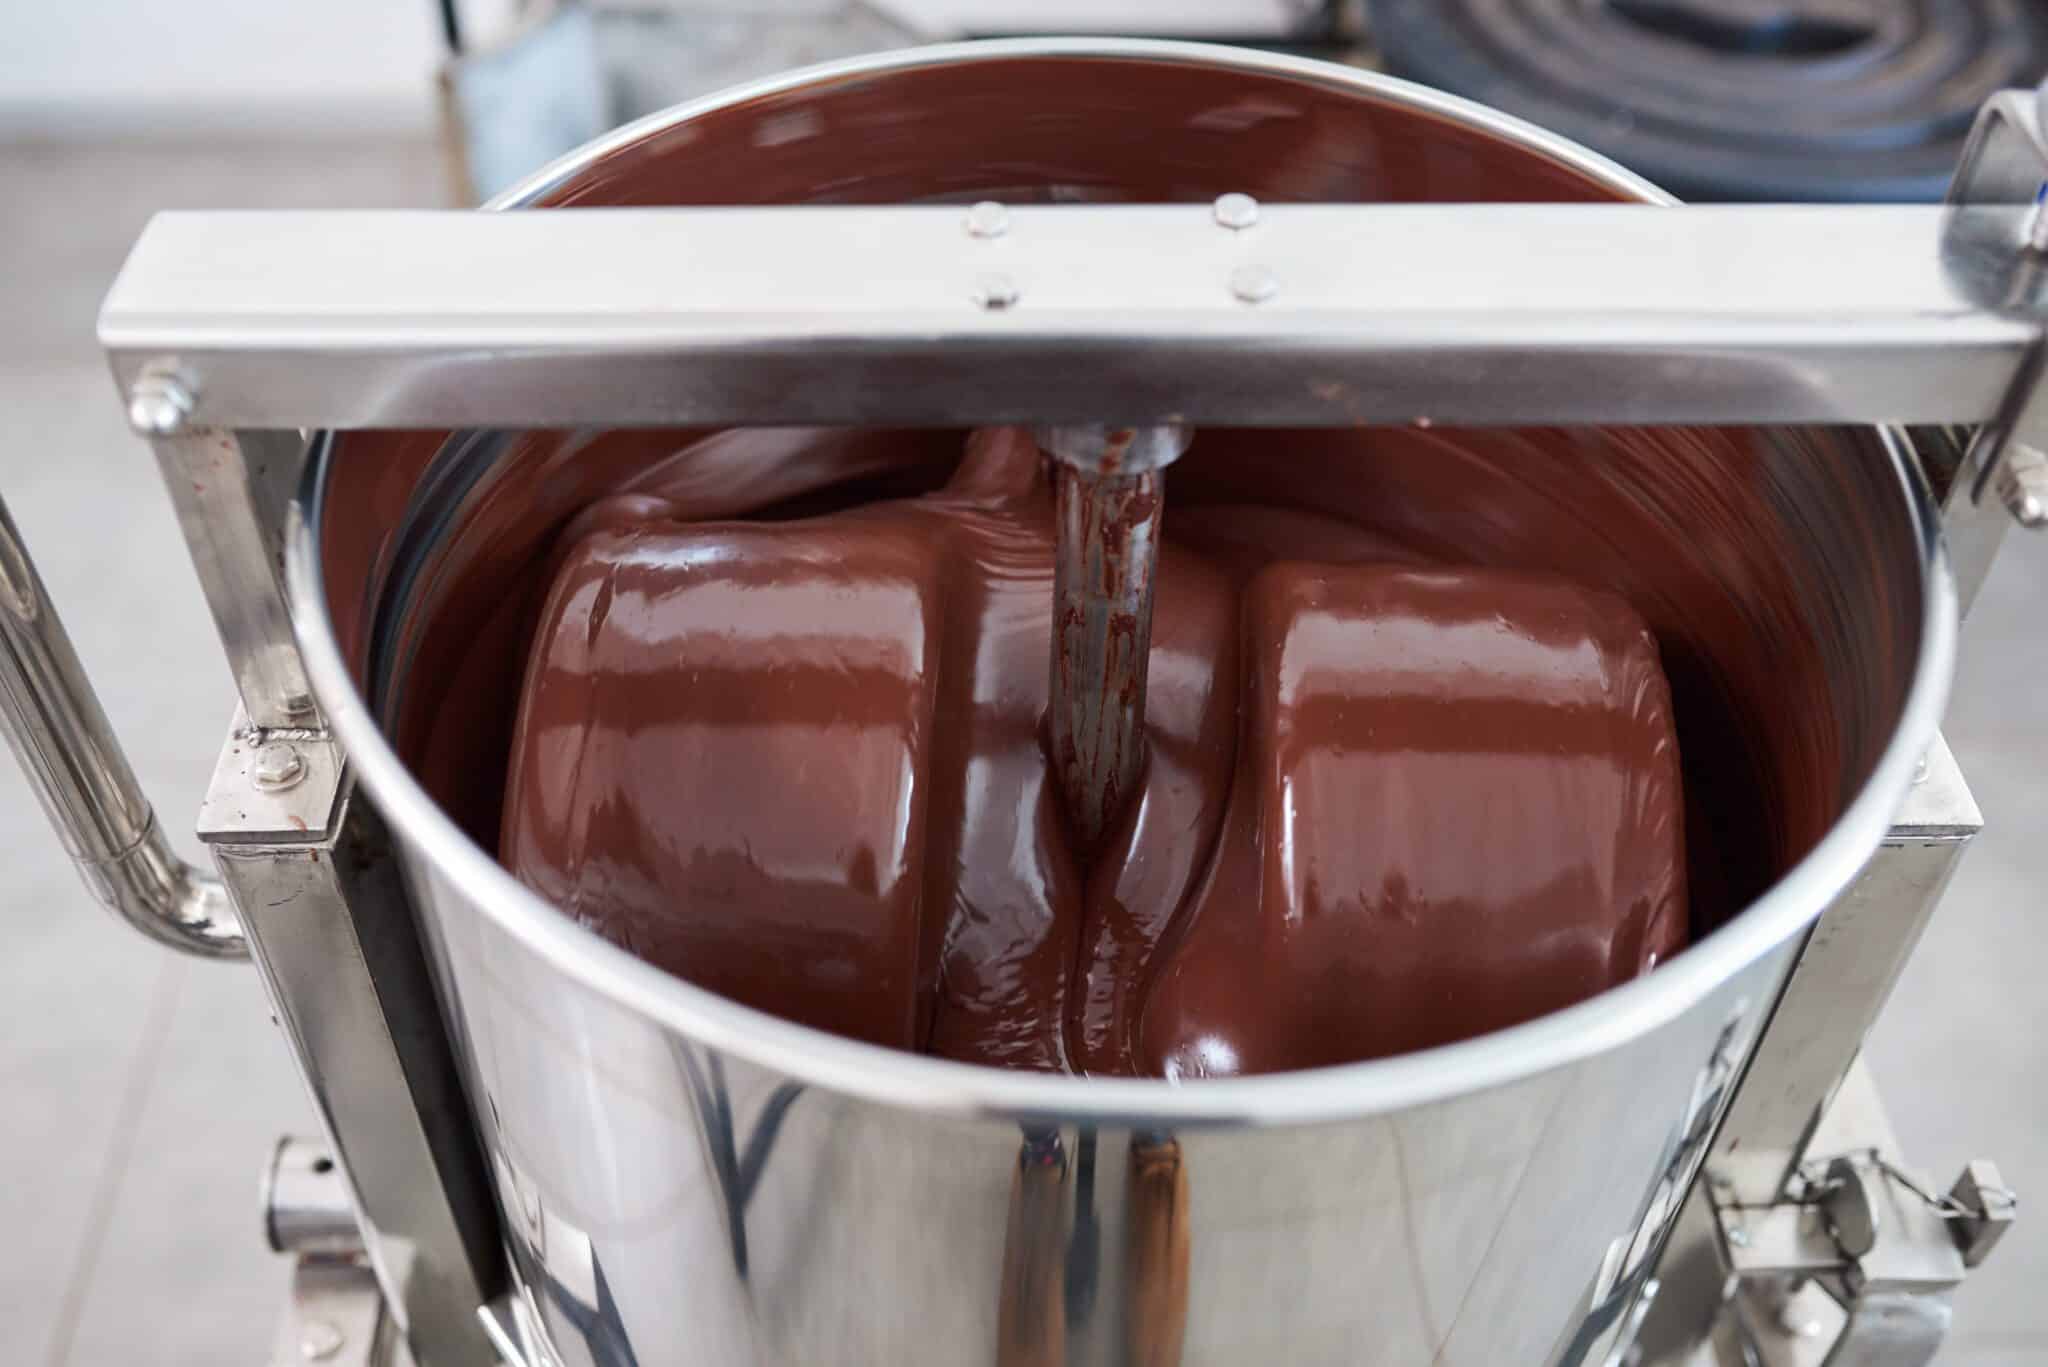 Closeup of large stainless steel mixer in an artisanal chocolate production factory turning melted chocolate